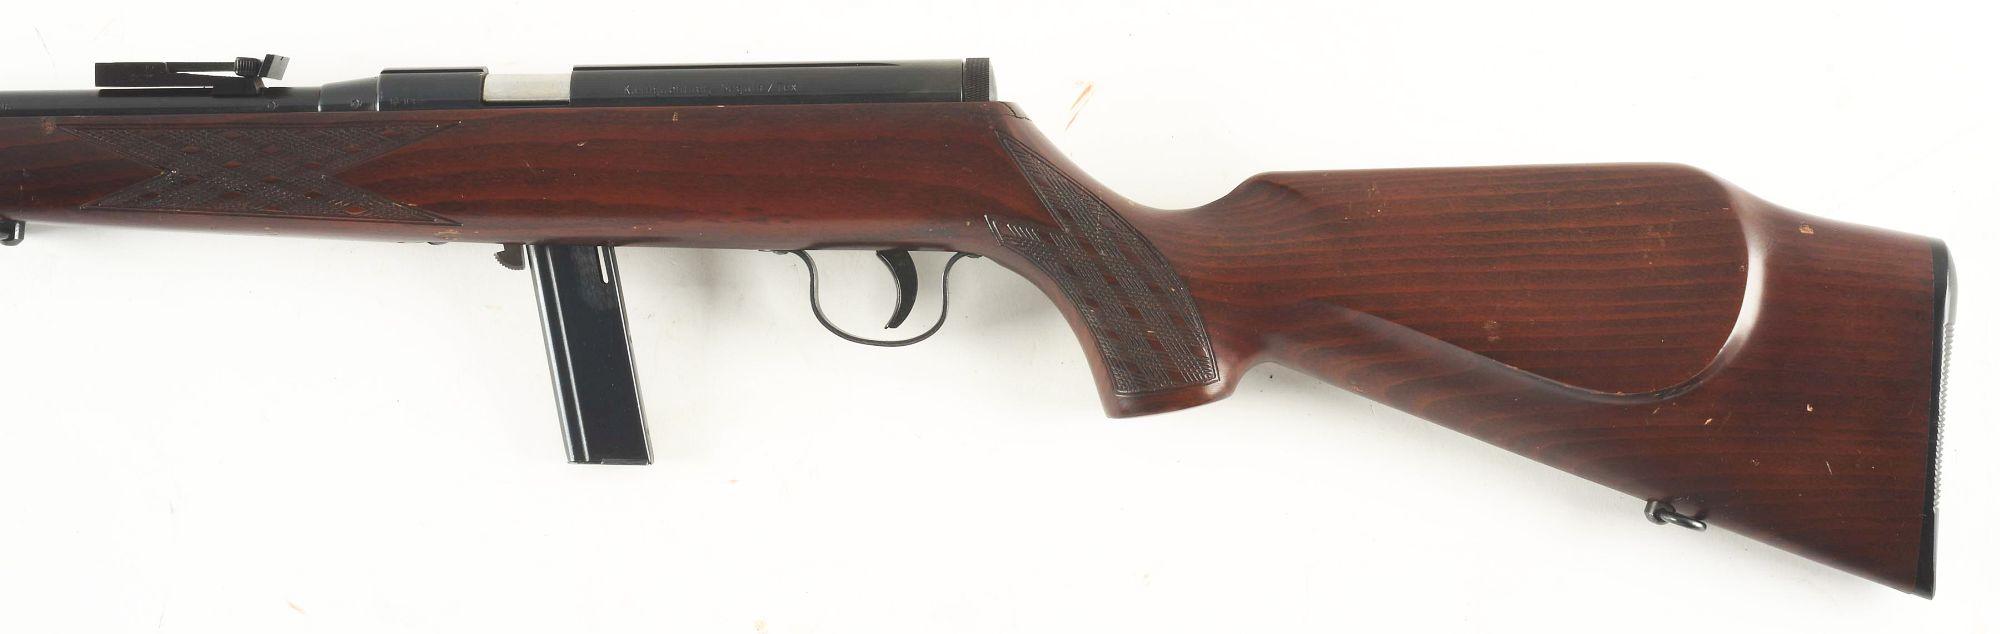 (N) SWD REGISTERED VOERE 2005/1 MACHINE GUN RIFLE IN .22 LR FULL AUTO (FULLY TRANSFERABLE).